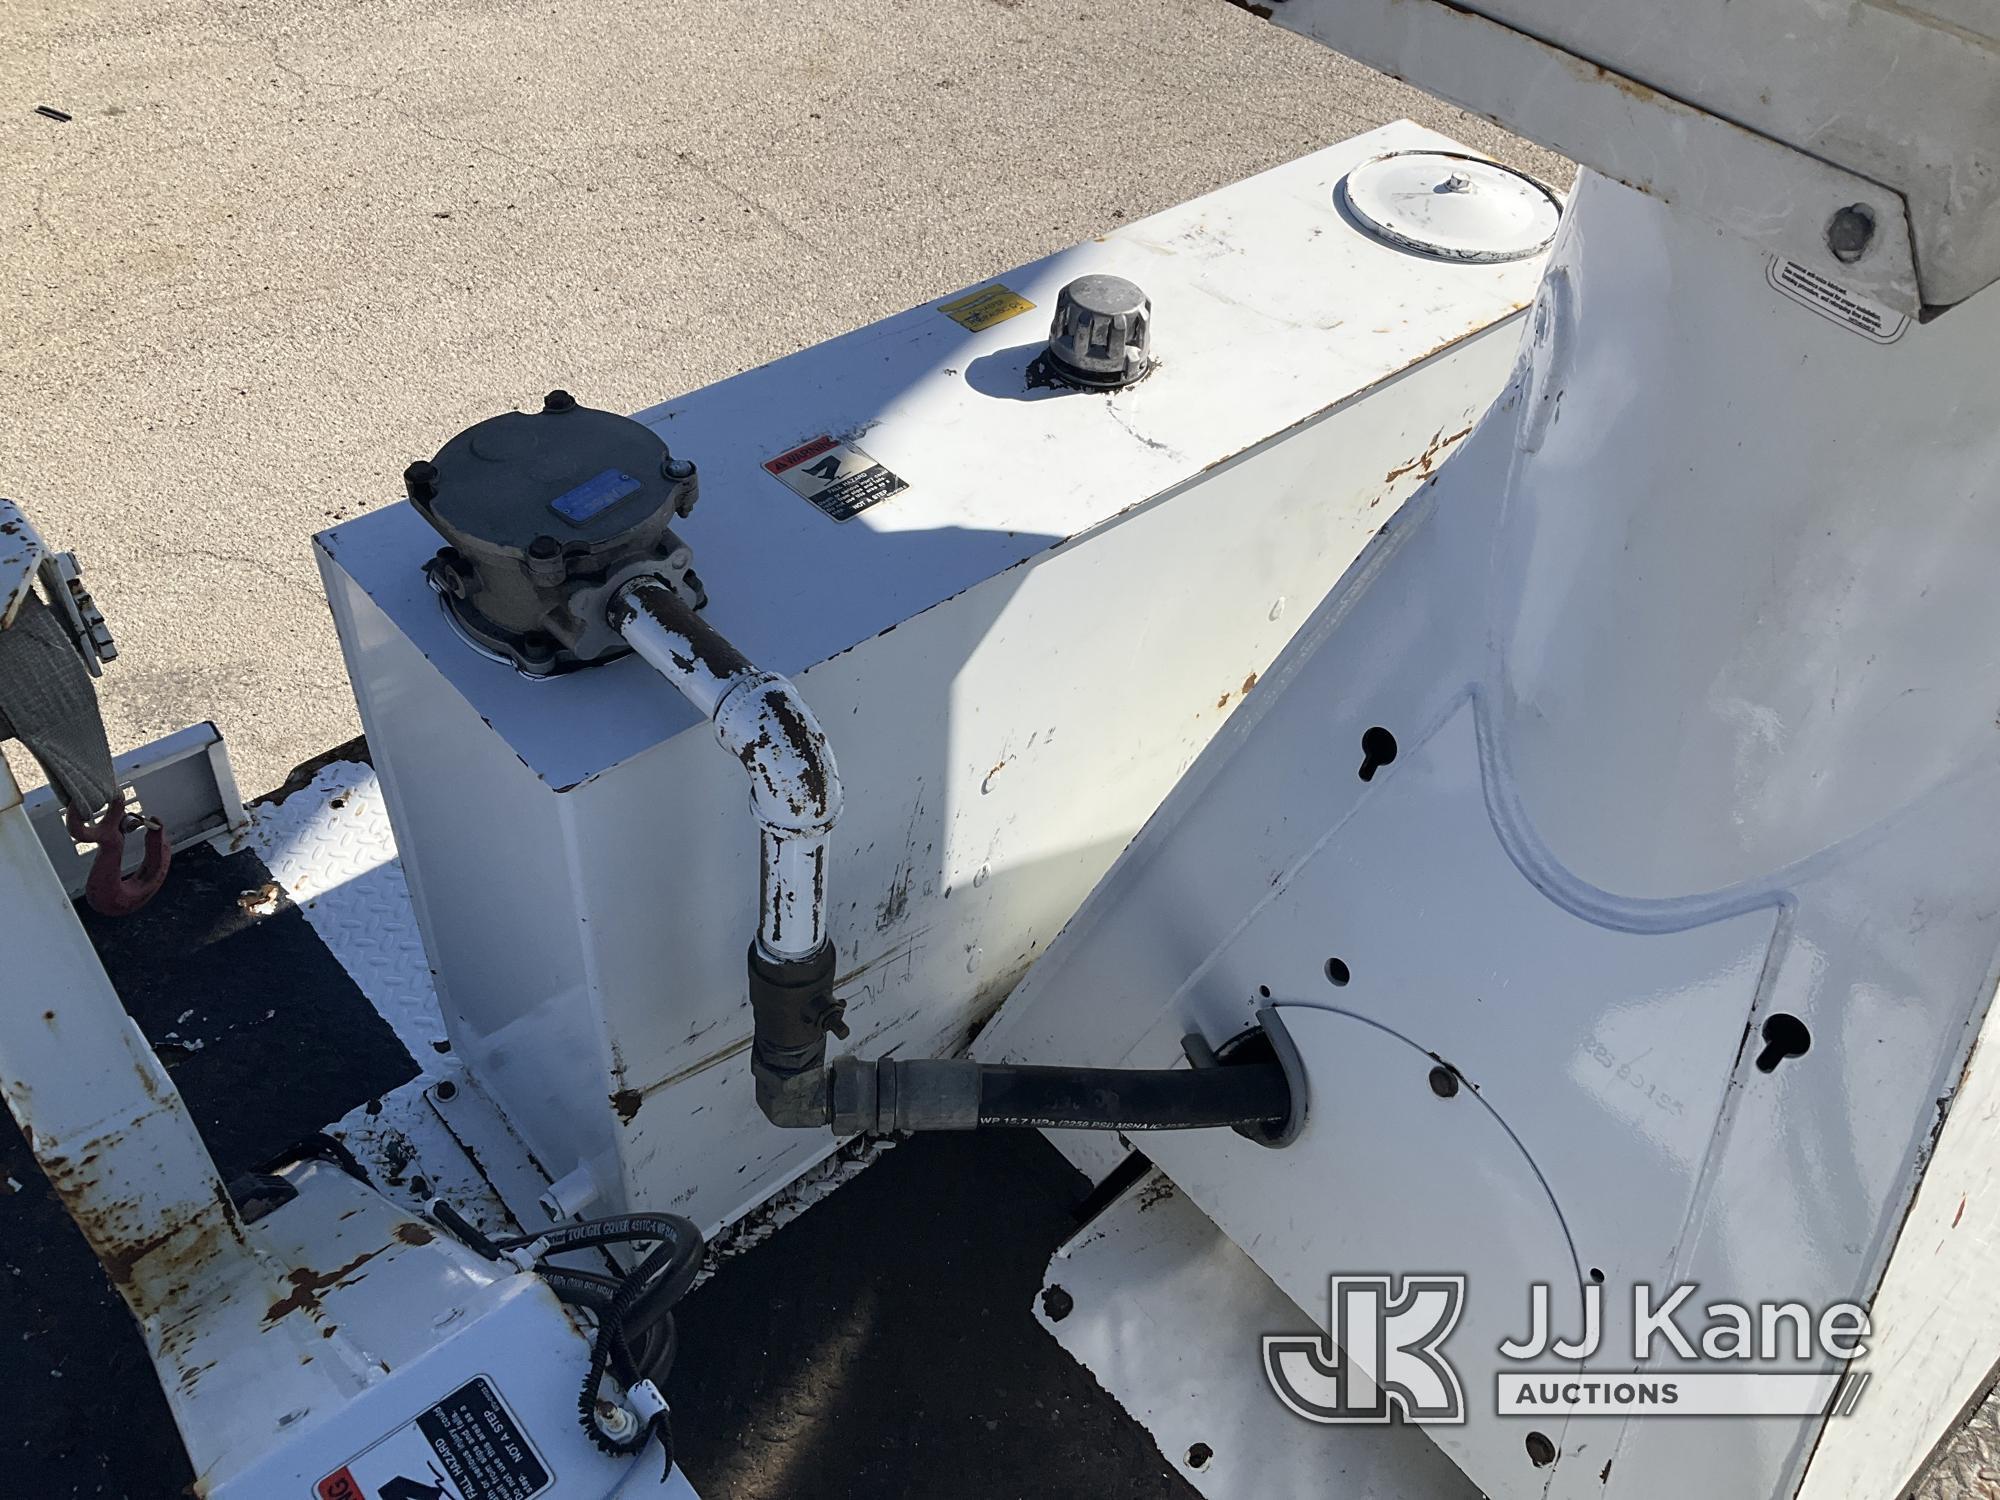 (Kansas City, MO) Altec DM45-TR, Digger Derrick rear mounted on 2013 Freightliner M2 106 T/A Flatbed